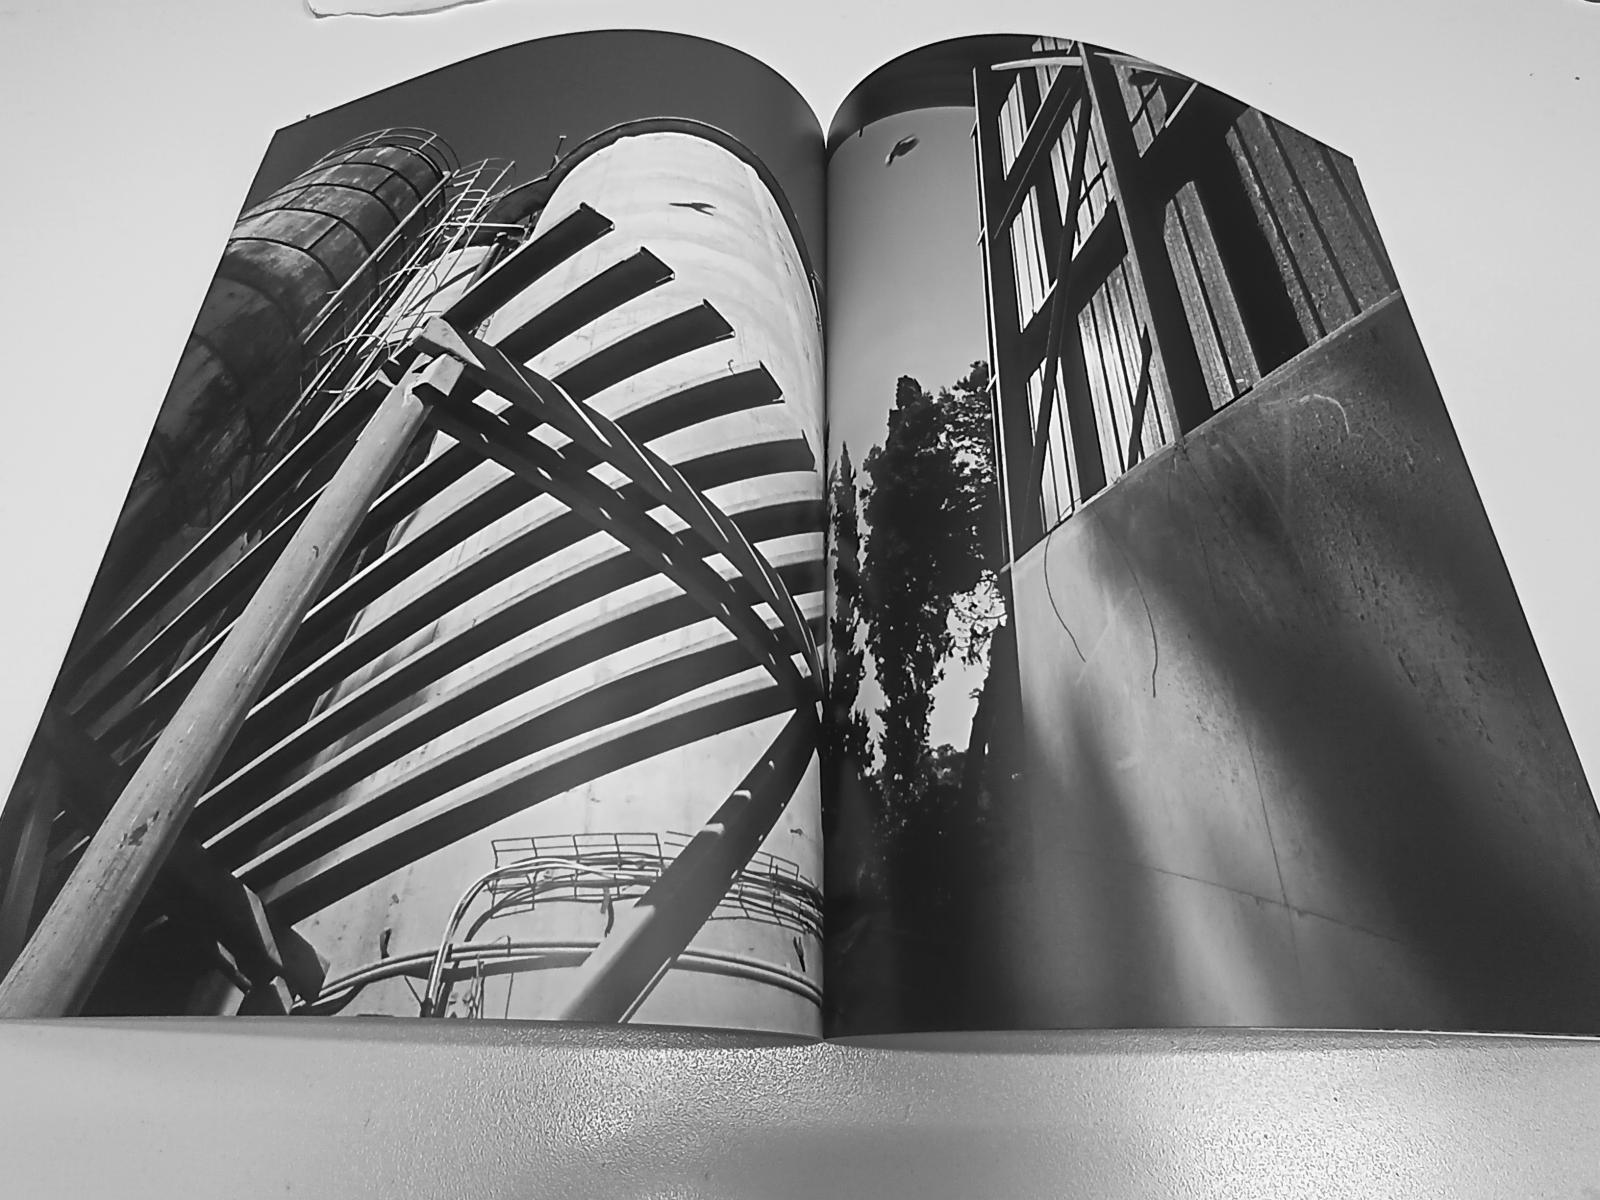 My third self-published photo book (this time a magazine) is available online in my Blurb site books portfolio. -   